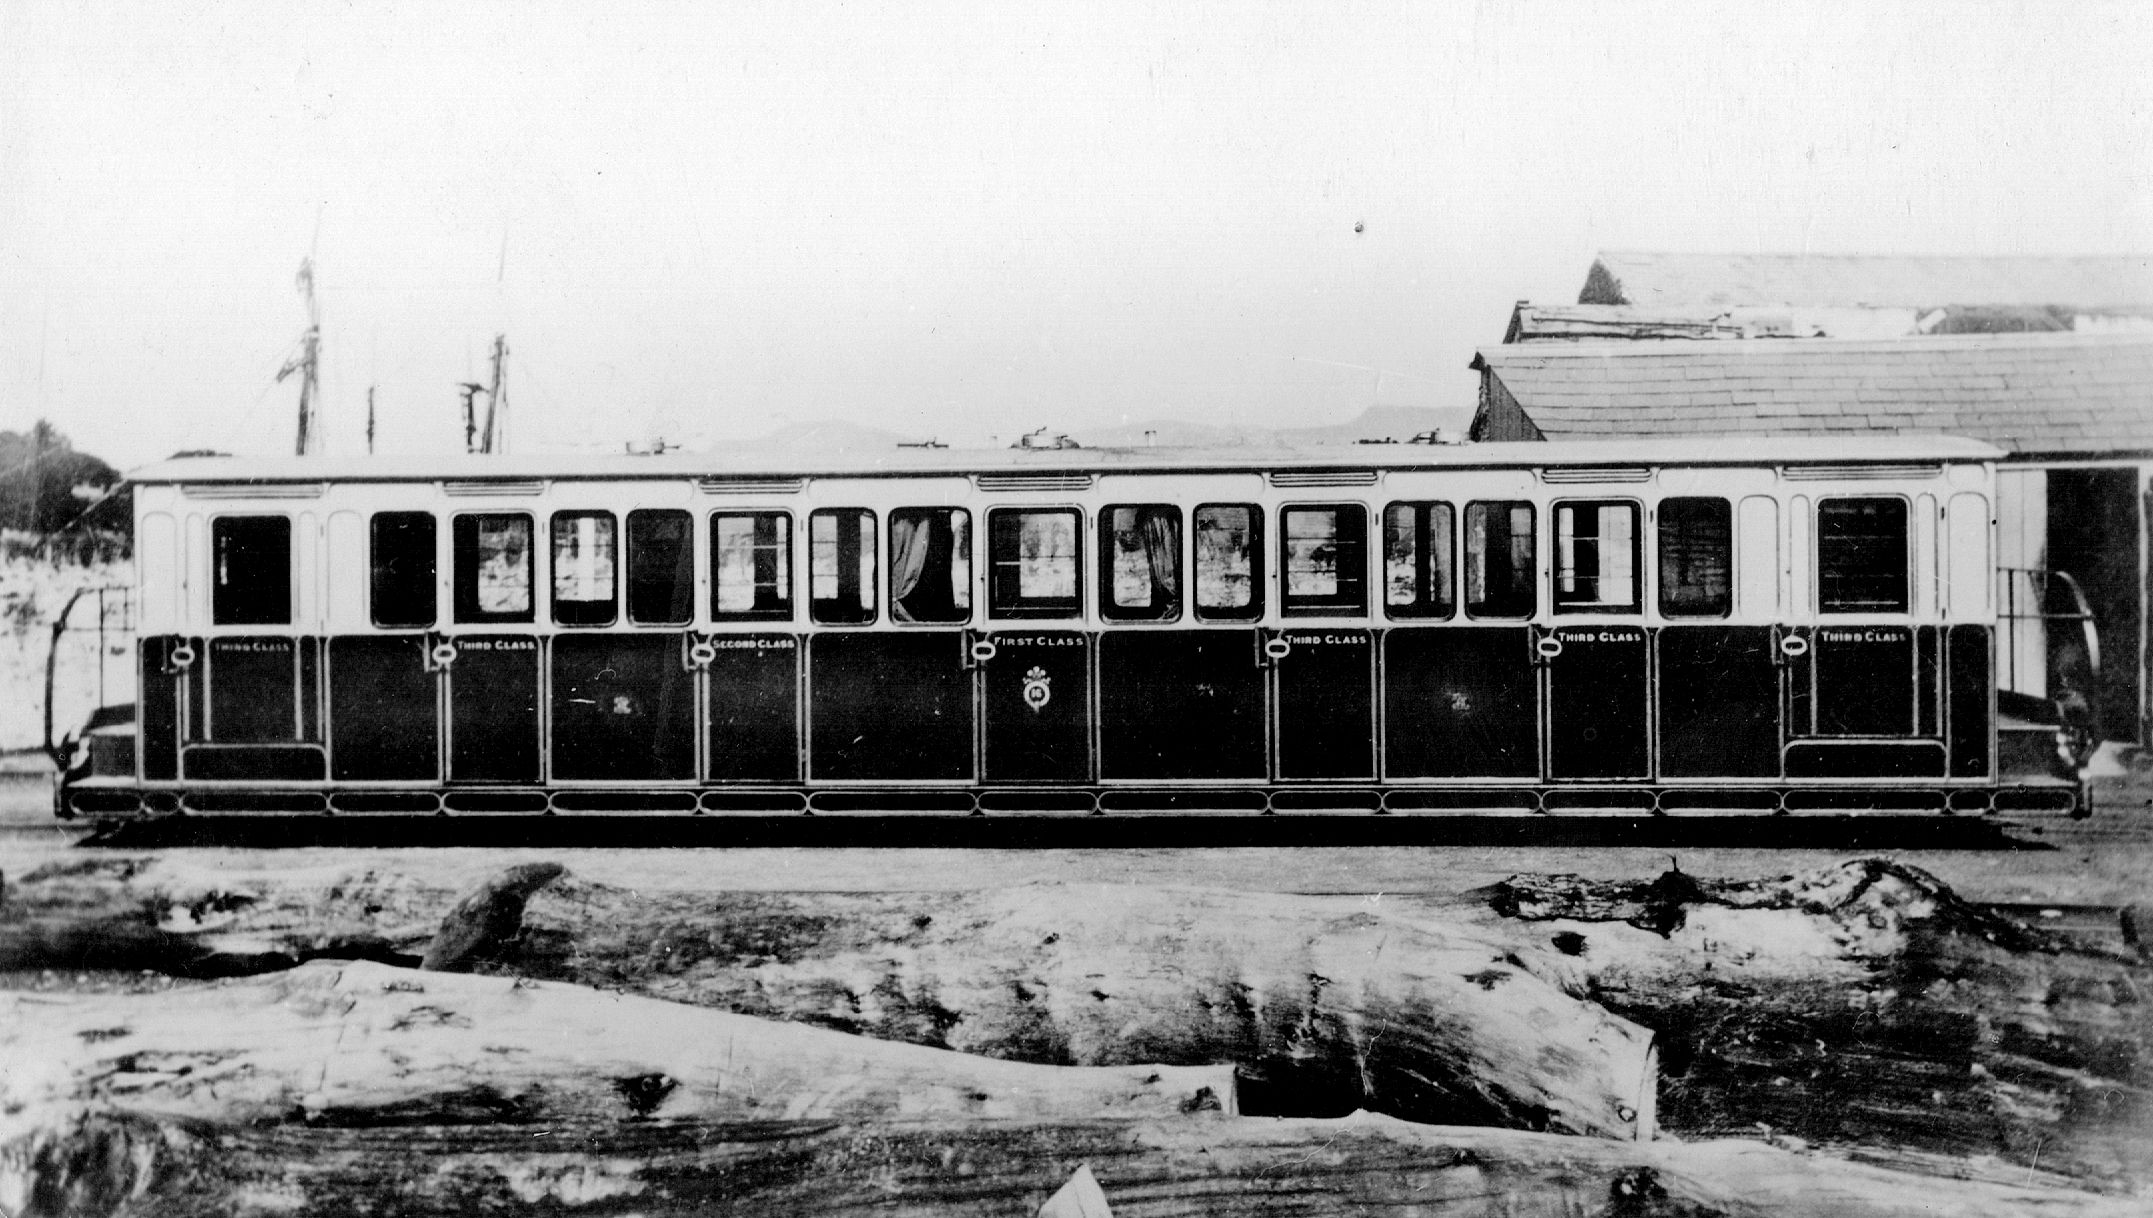 NGRS Collection 3 - Ffestiniog Rly - Undated poss c1900 - Bogie coach poss 15 or 16 at Harbour Station Porthmadog - Loco & General Rly Photos No 4883.jpg